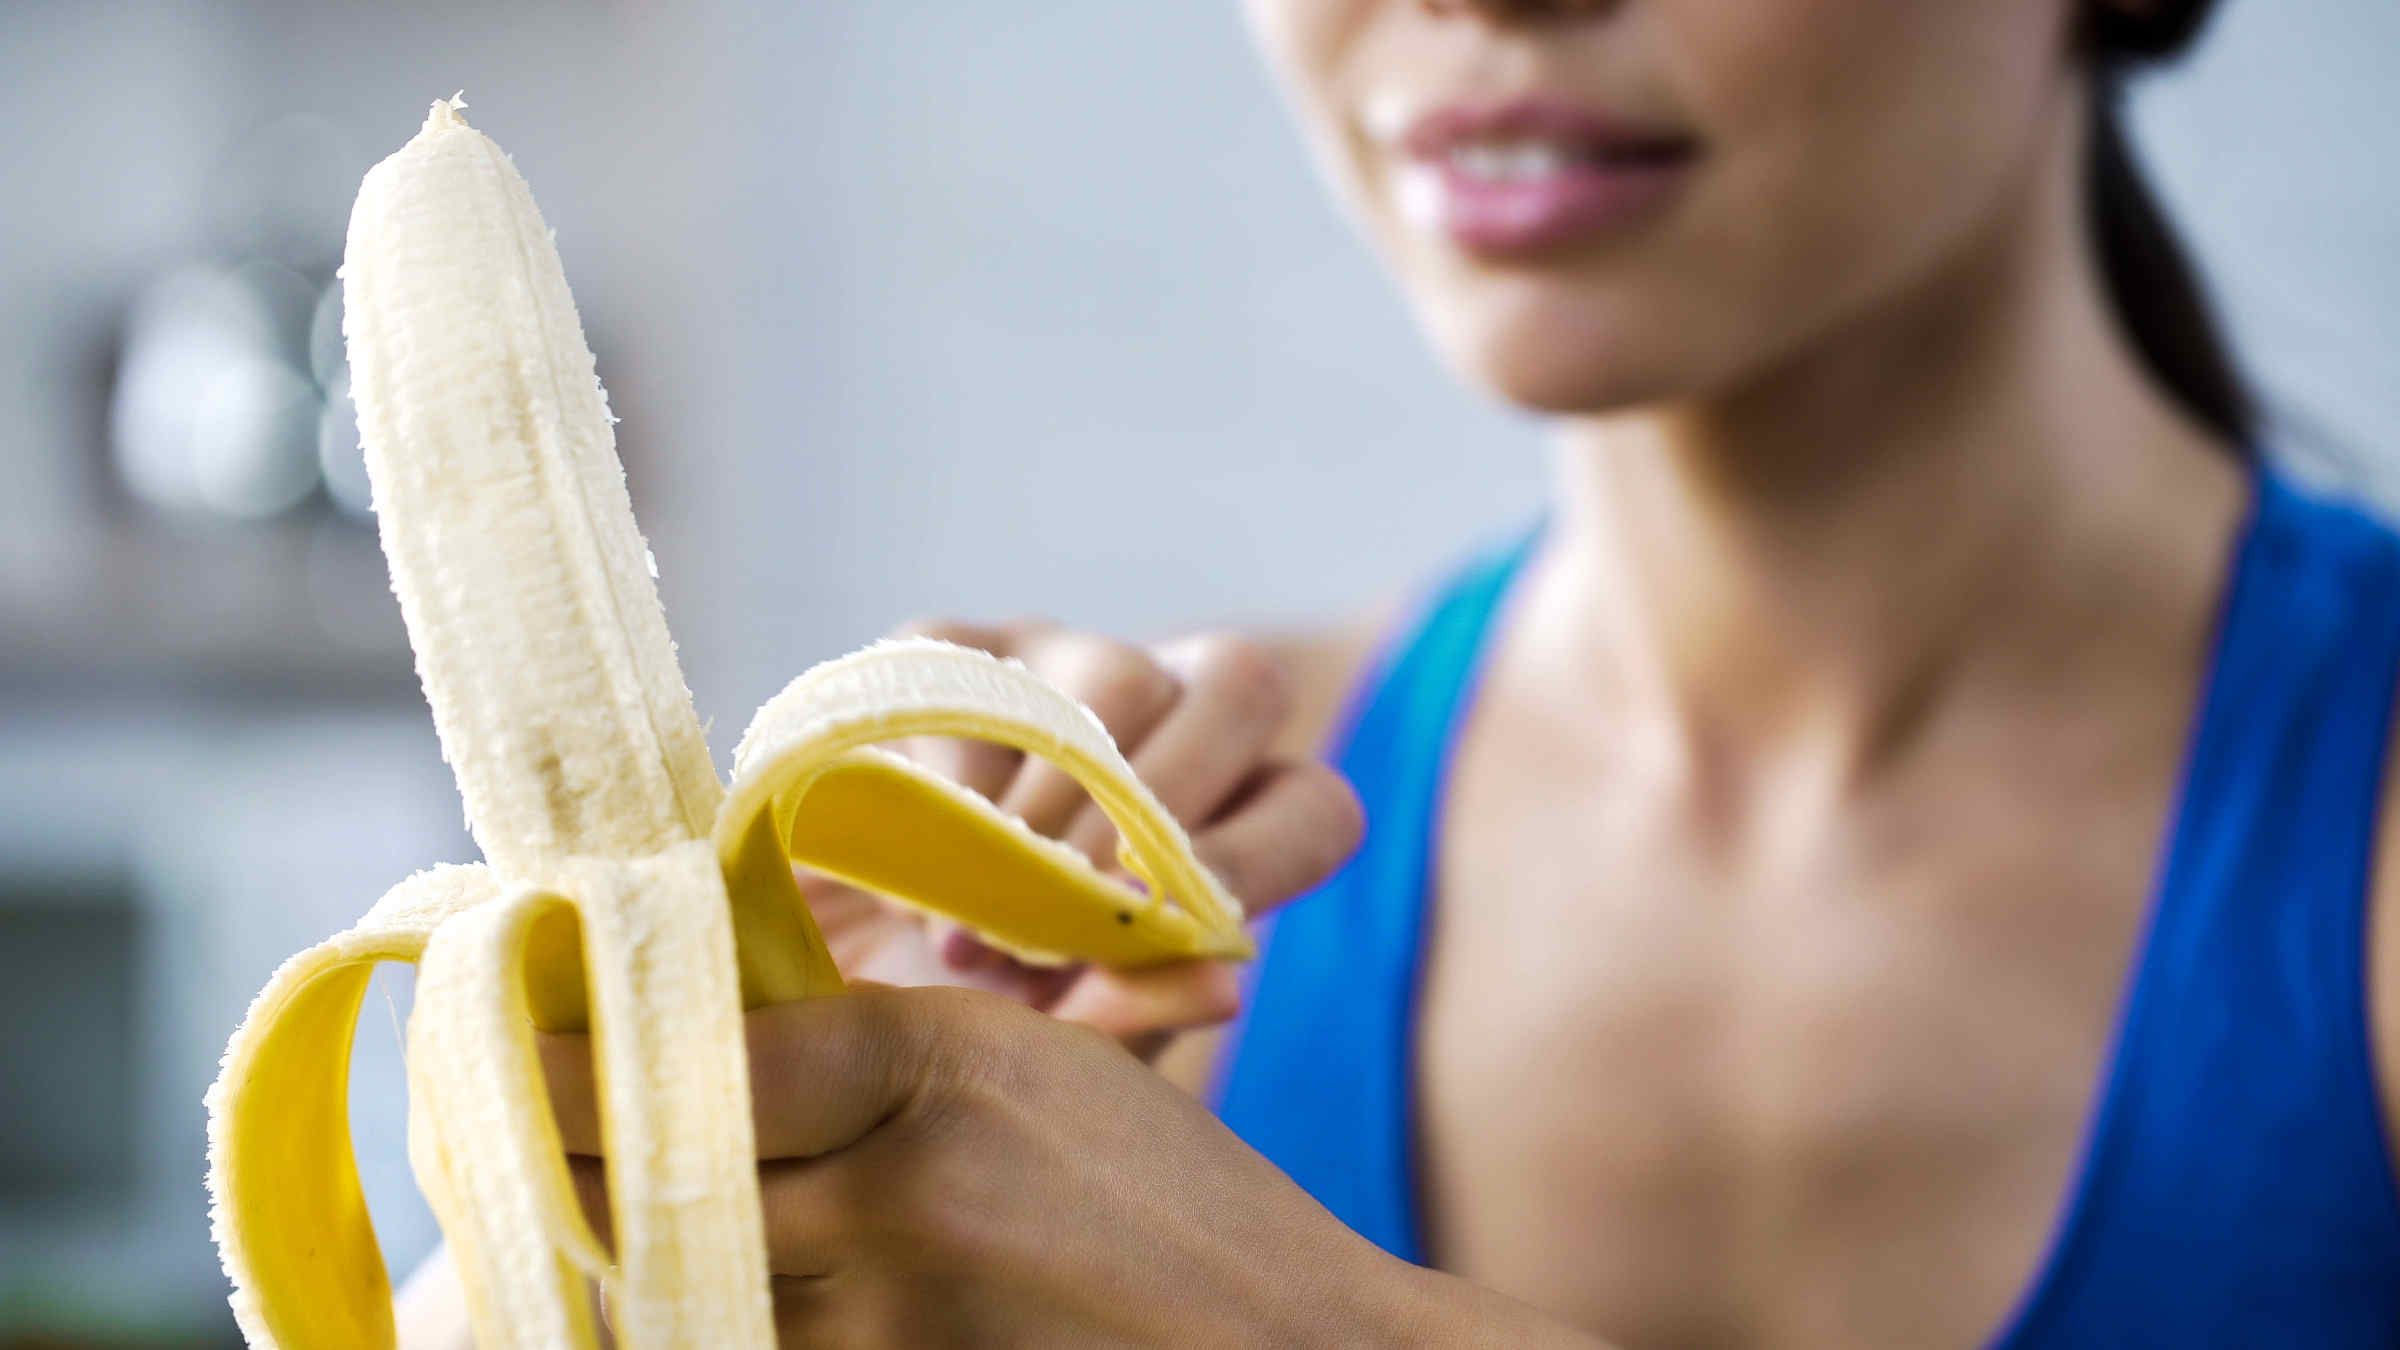 It's never too late to start treating your body right! Here are a few good reasons to start eating bananas every day.